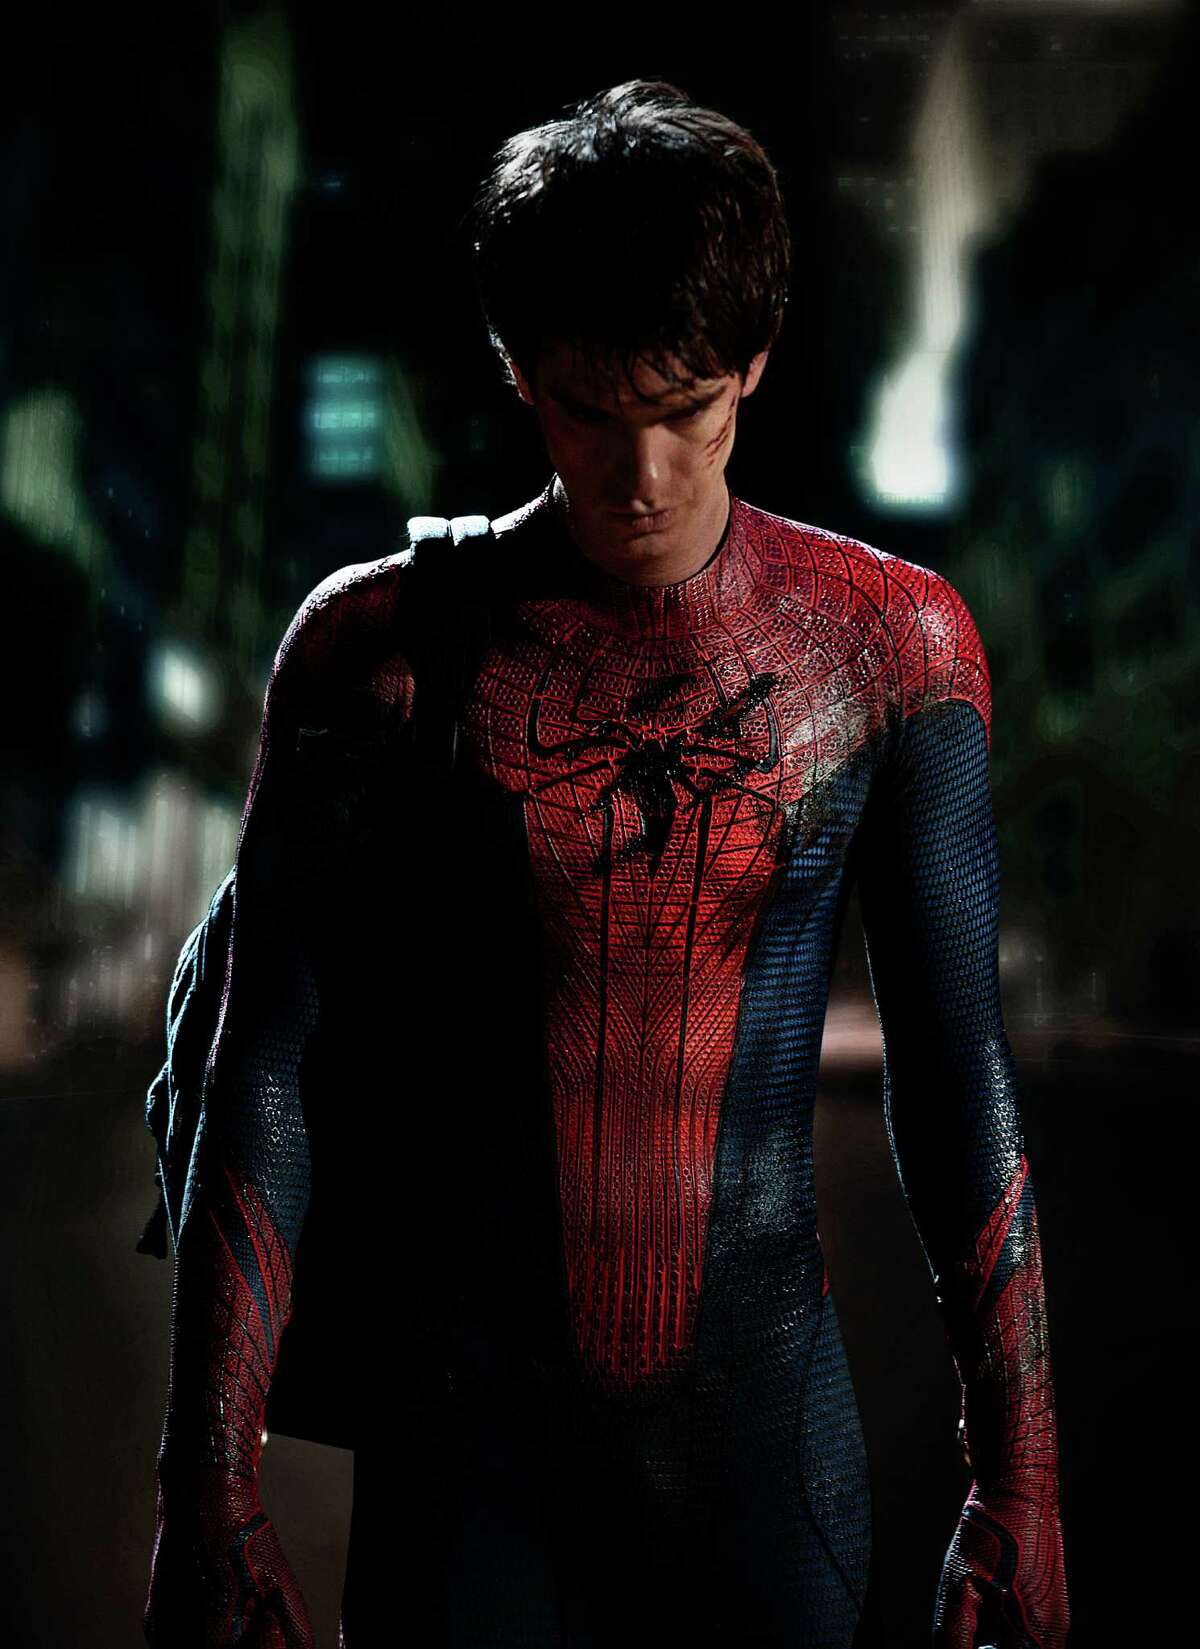 Andrew Garfield stars as Spider-Man/Peter Parker in Columbia Pictures' "The Amazing Spider-Man."